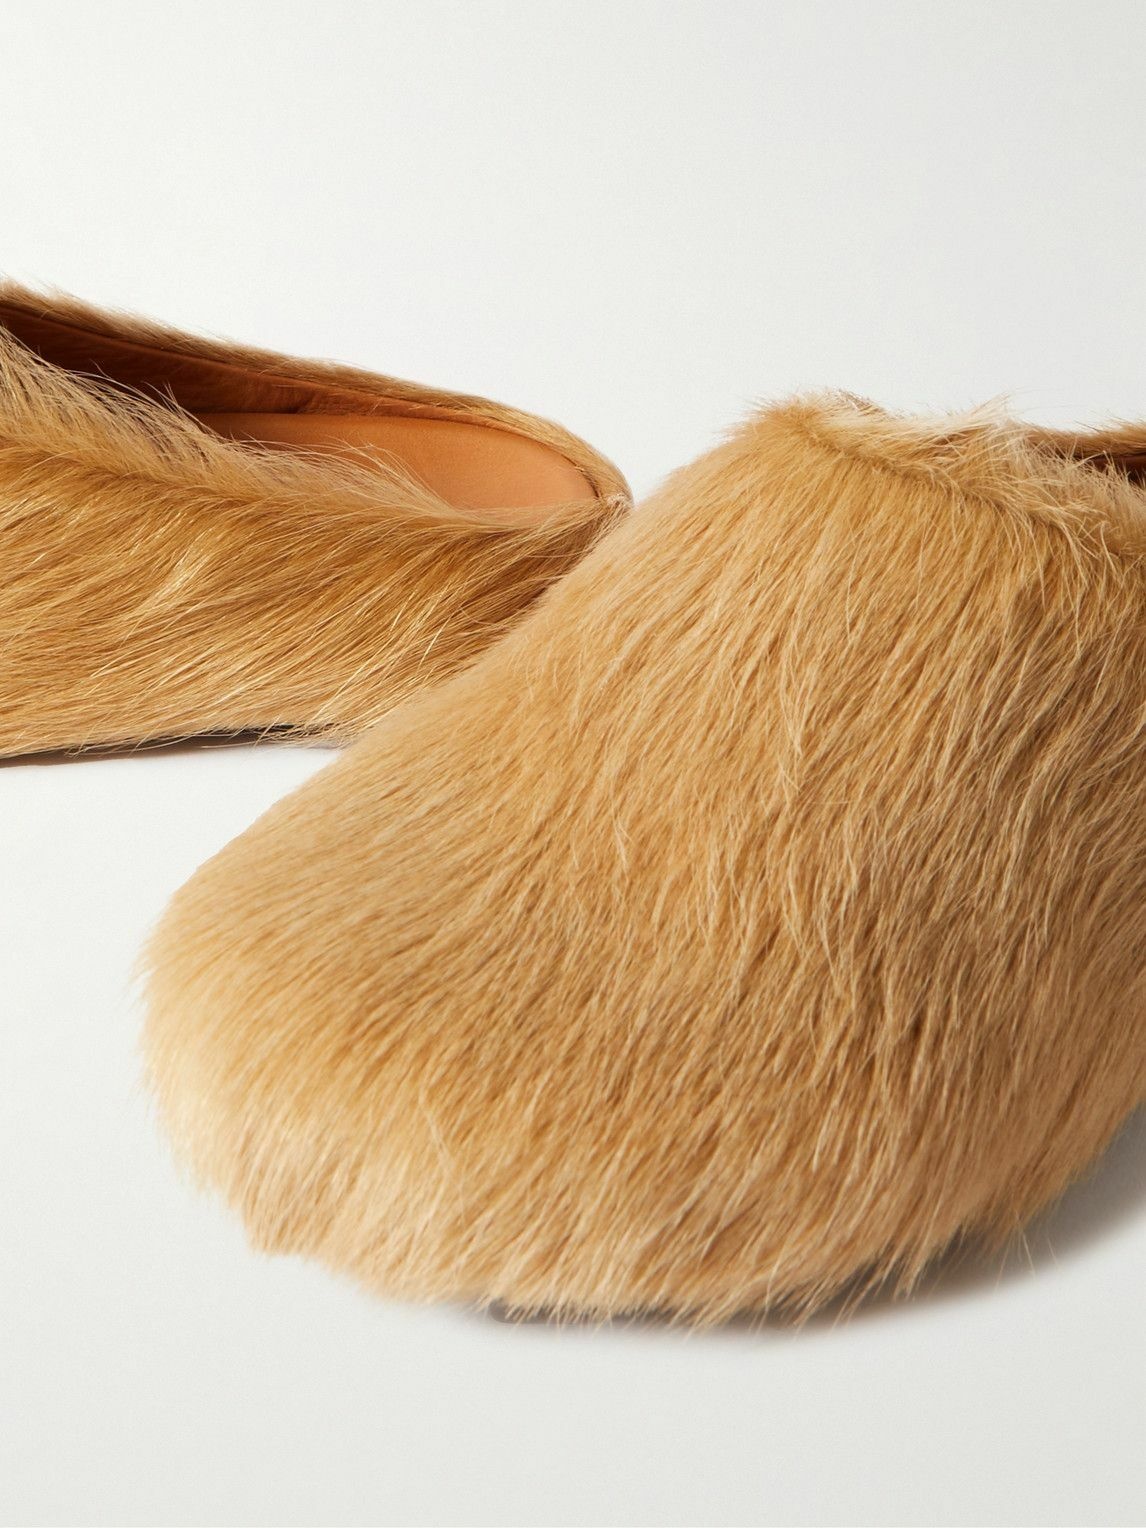 Gucci Has Released Slippers Made From Hair, And They Look Like Little  Chewbaccas